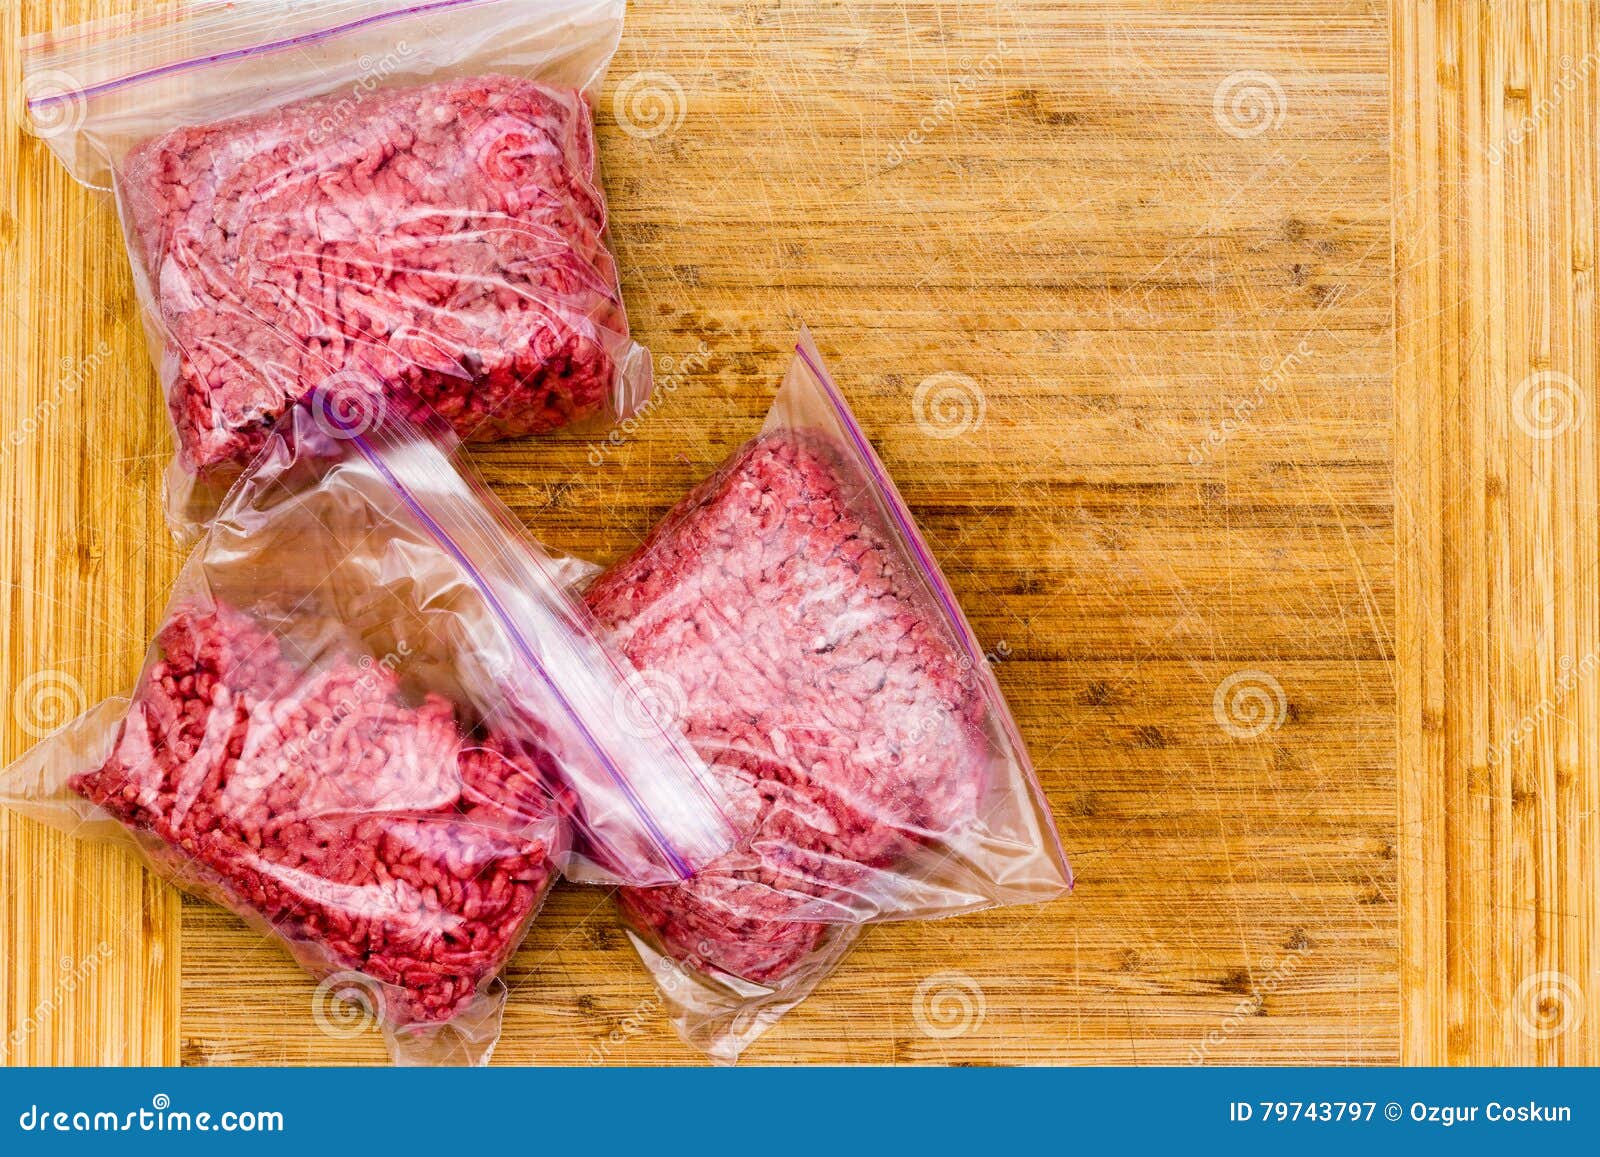 https://thumbs.dreamstime.com/z/fresh-ground-beef-plastic-bags-resealable-ready-to-go-freezer-storage-wooden-bamboo-cutting-board-viewed-79743797.jpg